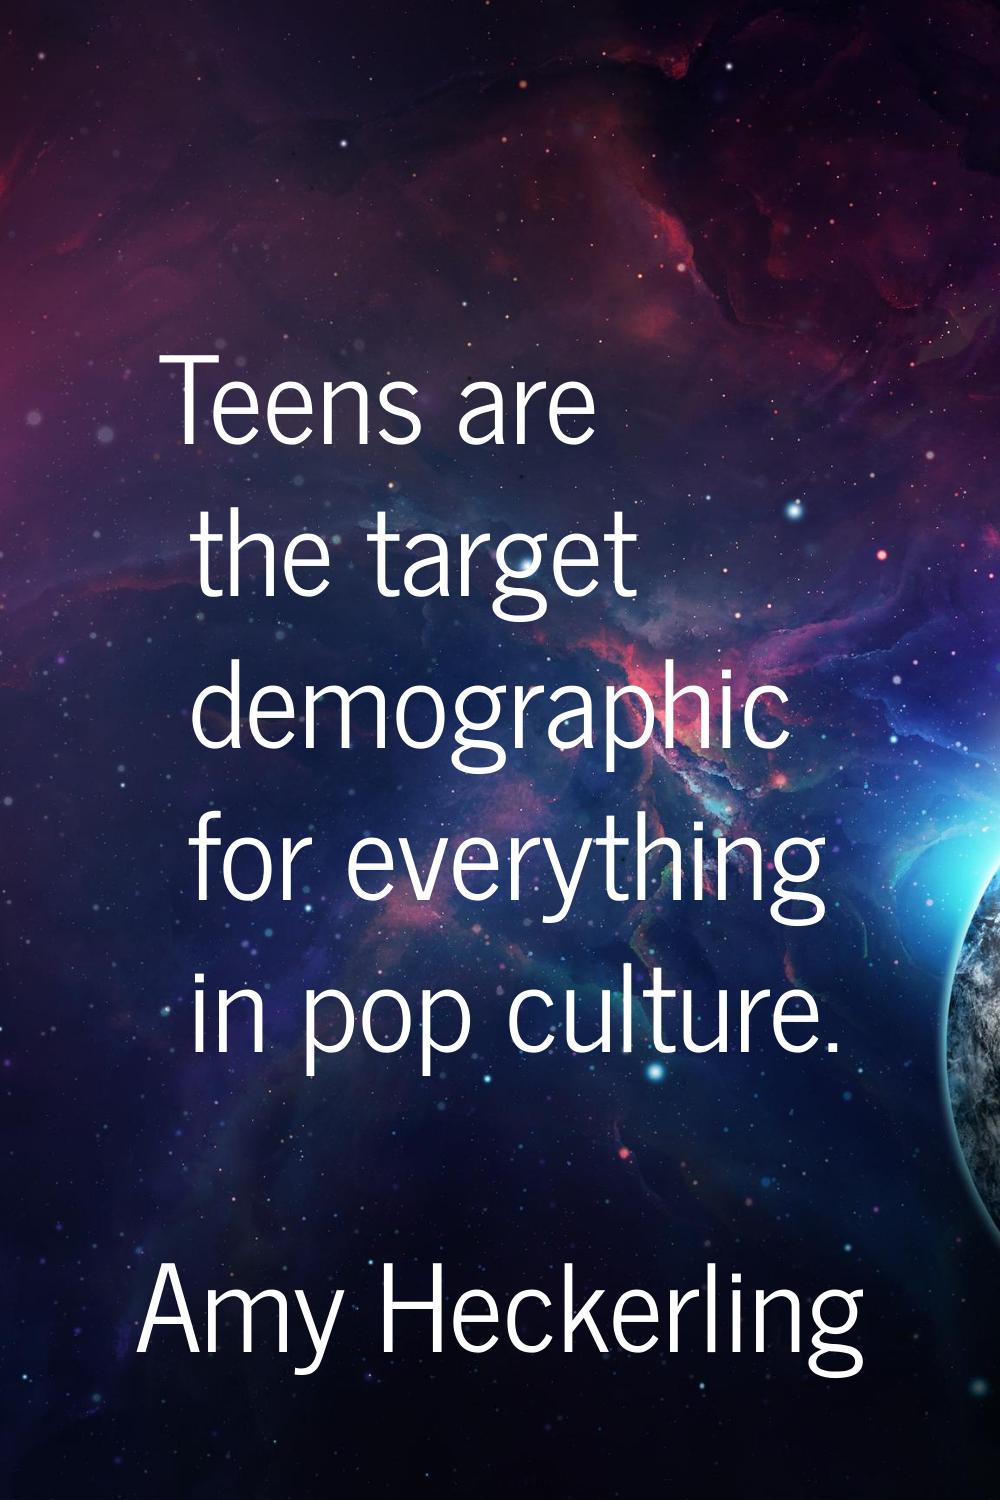 Teens are the target demographic for everything in pop culture.